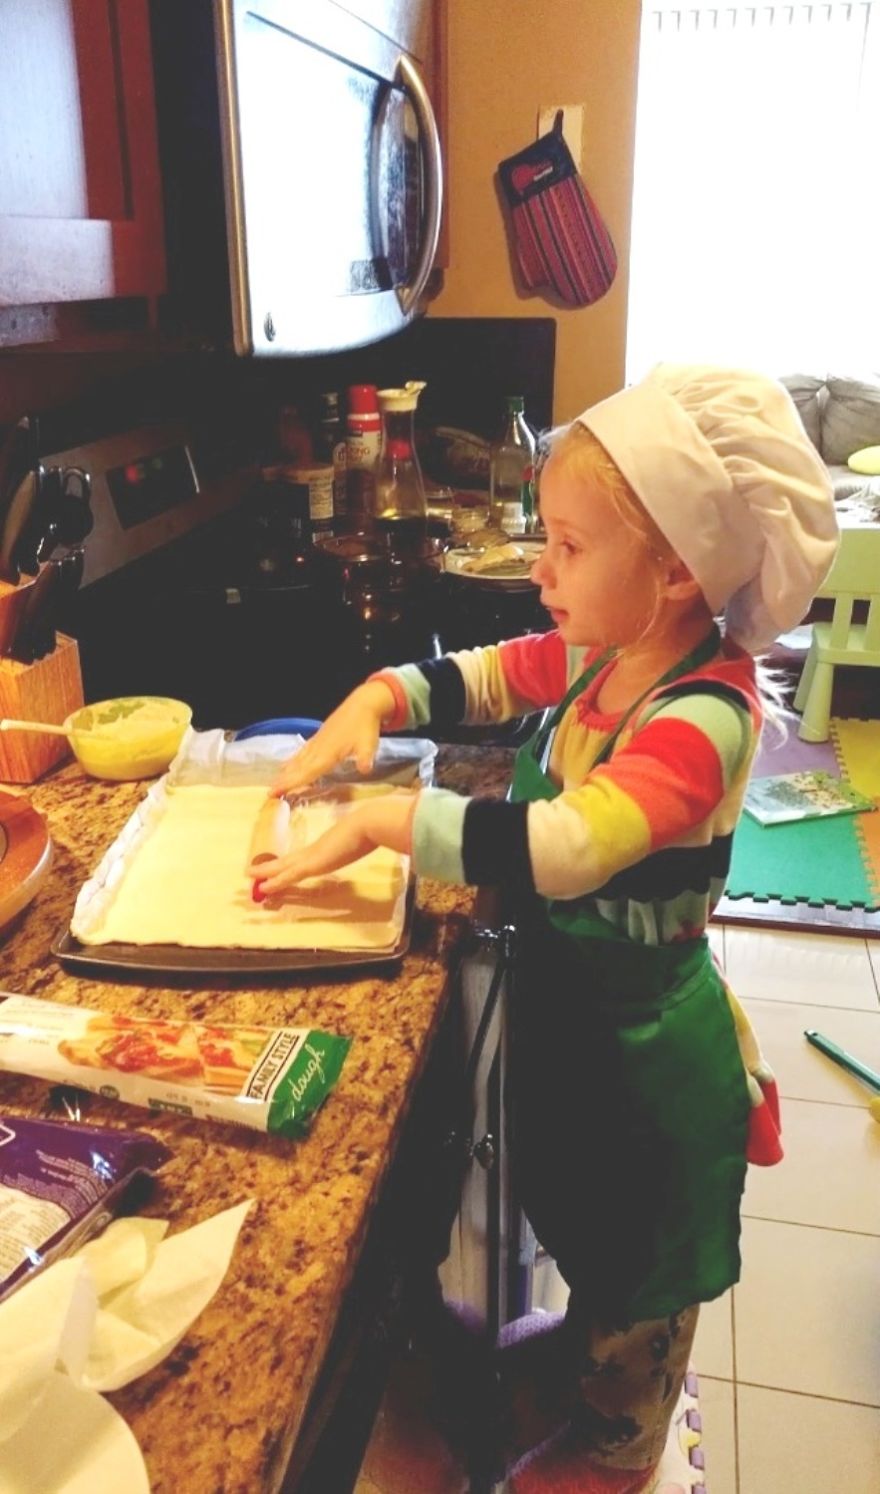 It's Important To Sing "Pat A Cake" While Making Pizza.